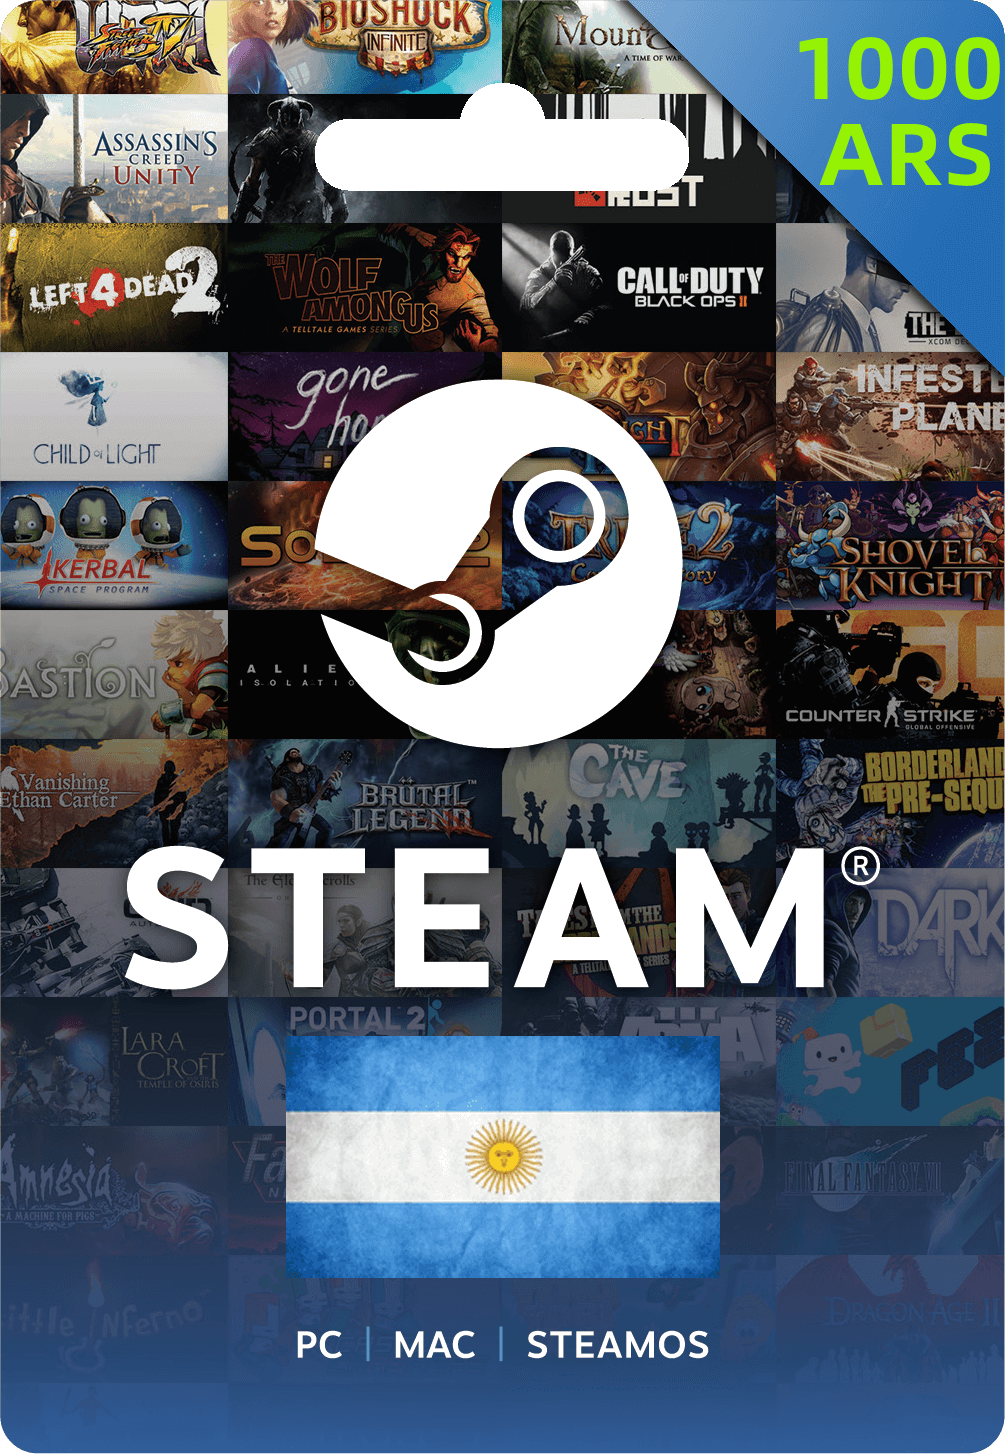 Скриншот 💗Steam Wallet Gift Card 1000ARS - Argentina Account💗